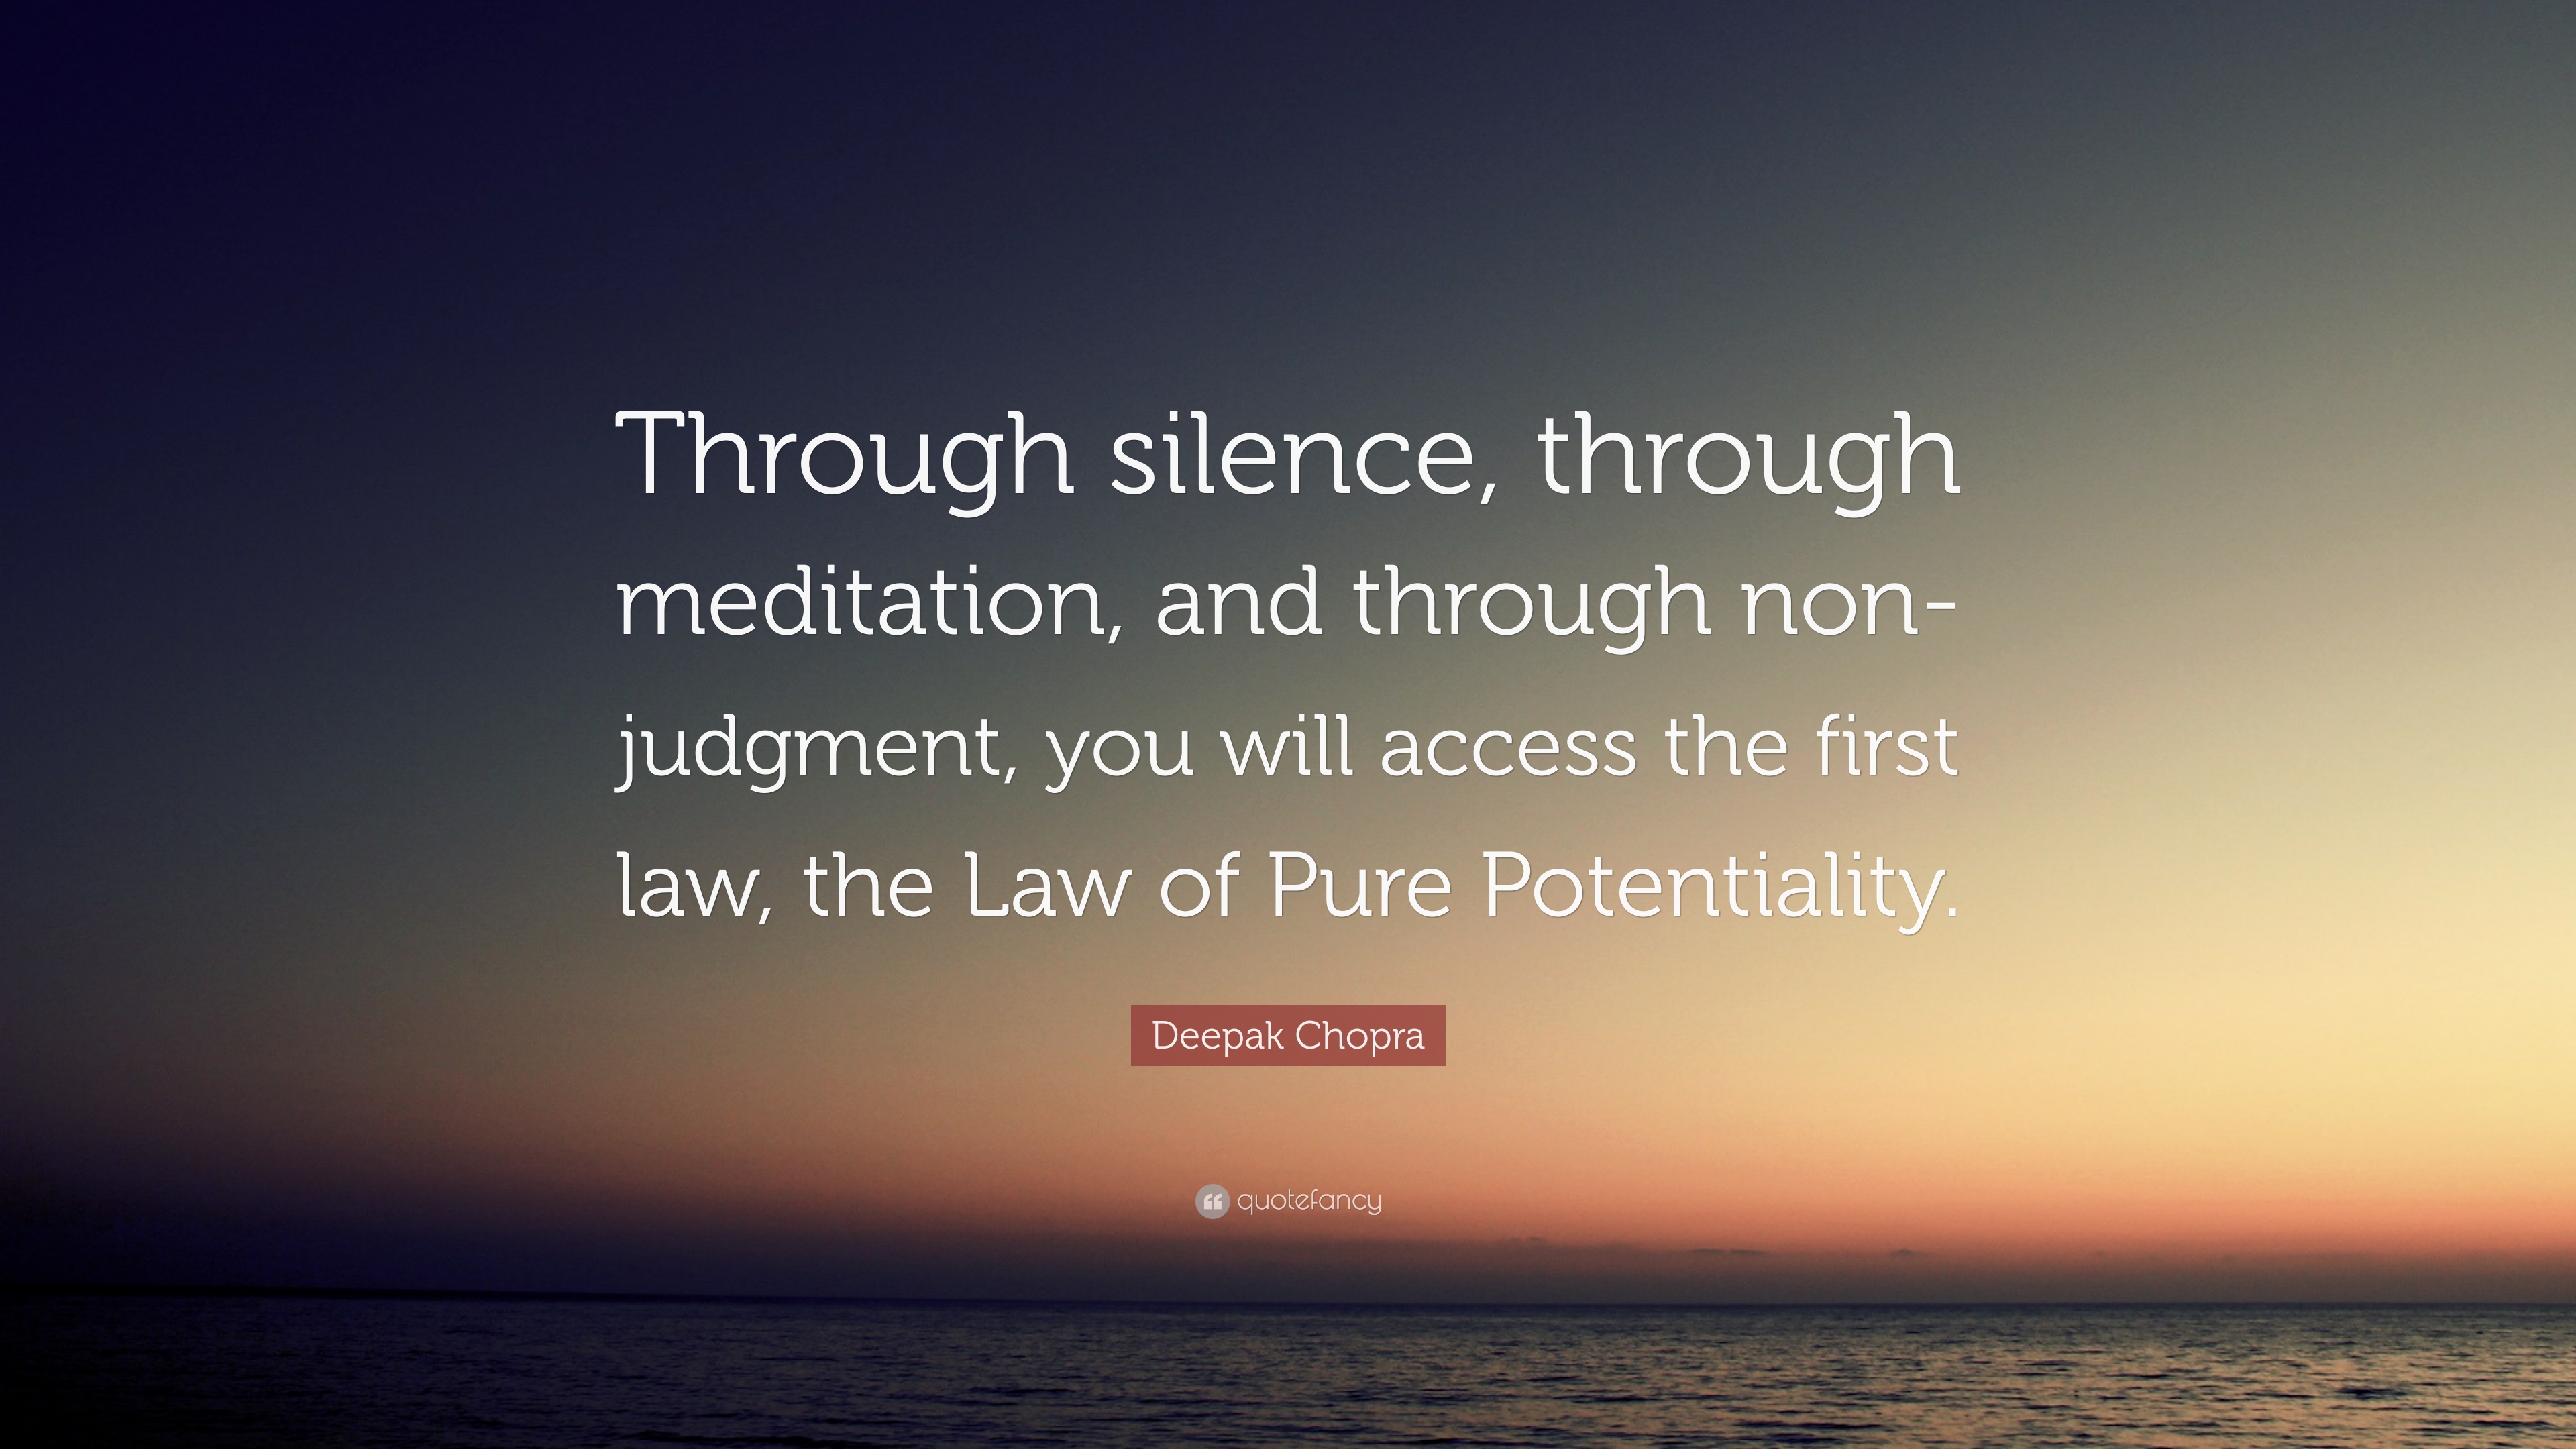 Through silence, through meditation, and through non- judgment, you will access the first law, the law of pure potentiality. Deepak chopra